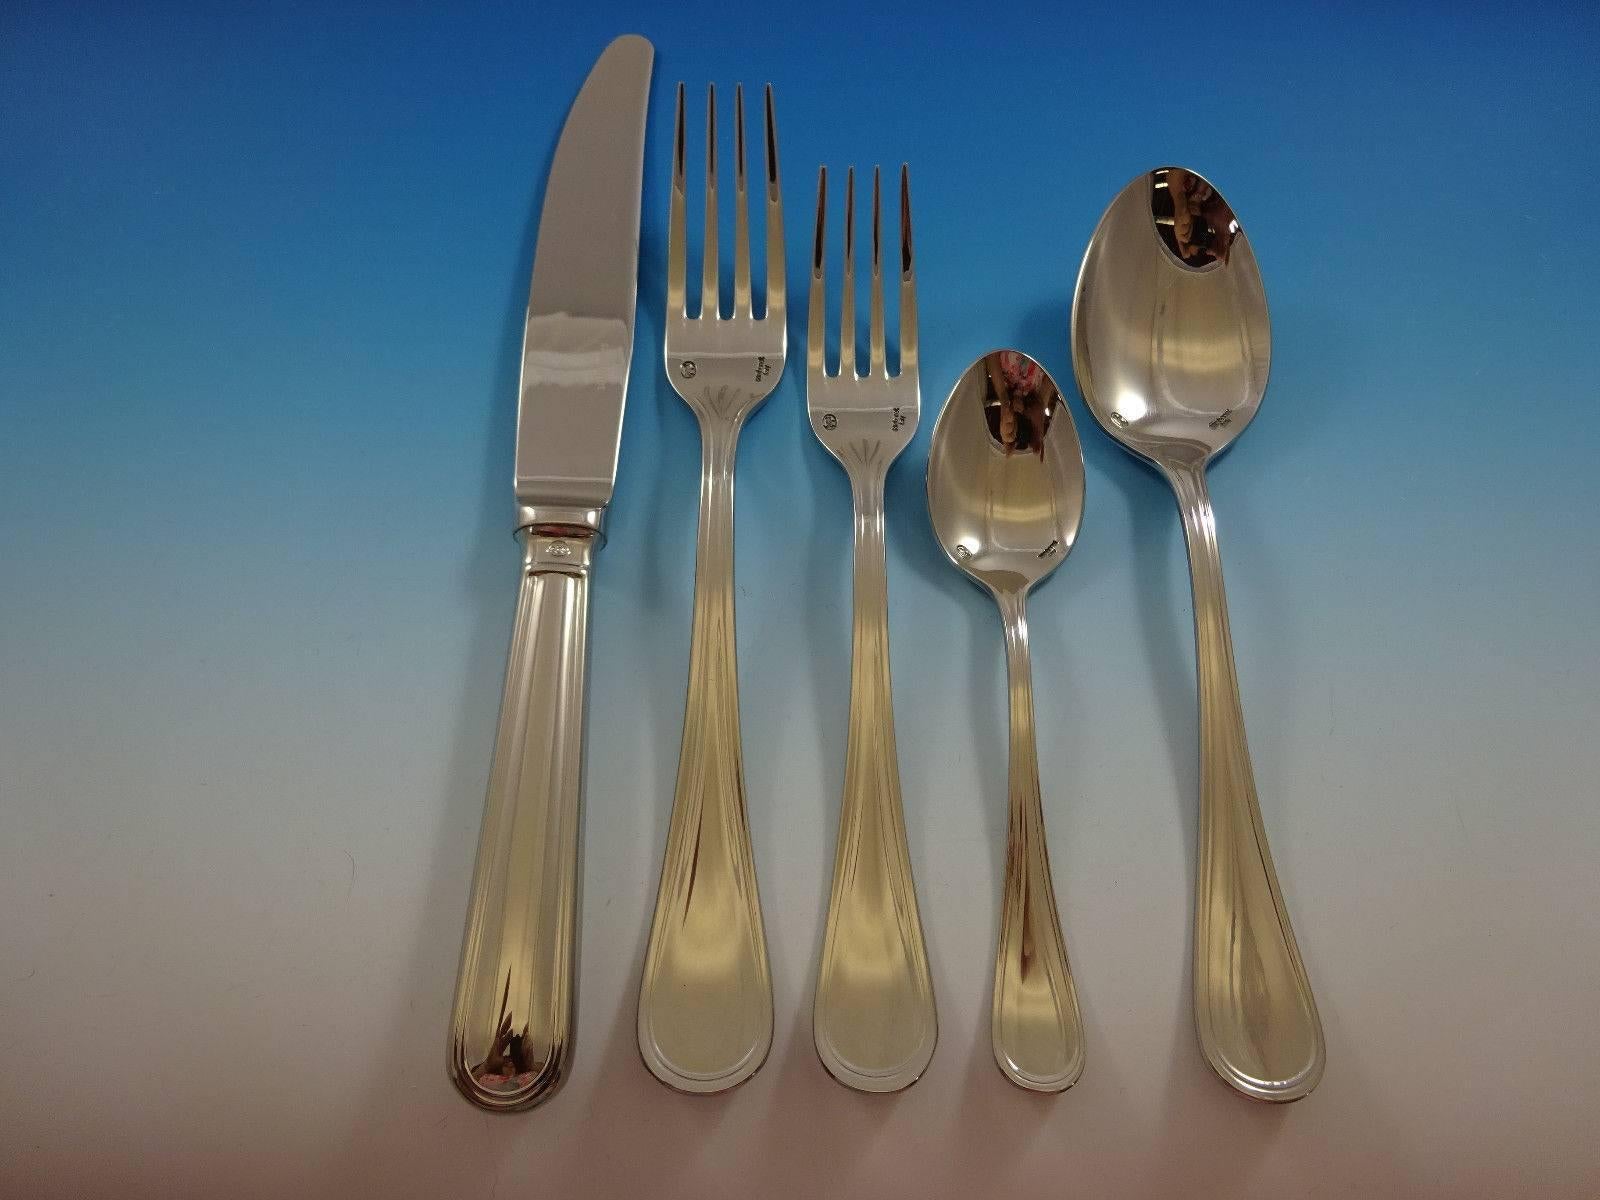 Each piece of Sambonet silverware is a unique work of art, built on history, originality and craftsmanship. From a true and trusted Italian silversmith tradition, each piece is made with the finest materials and notable Italian excellence and taste.